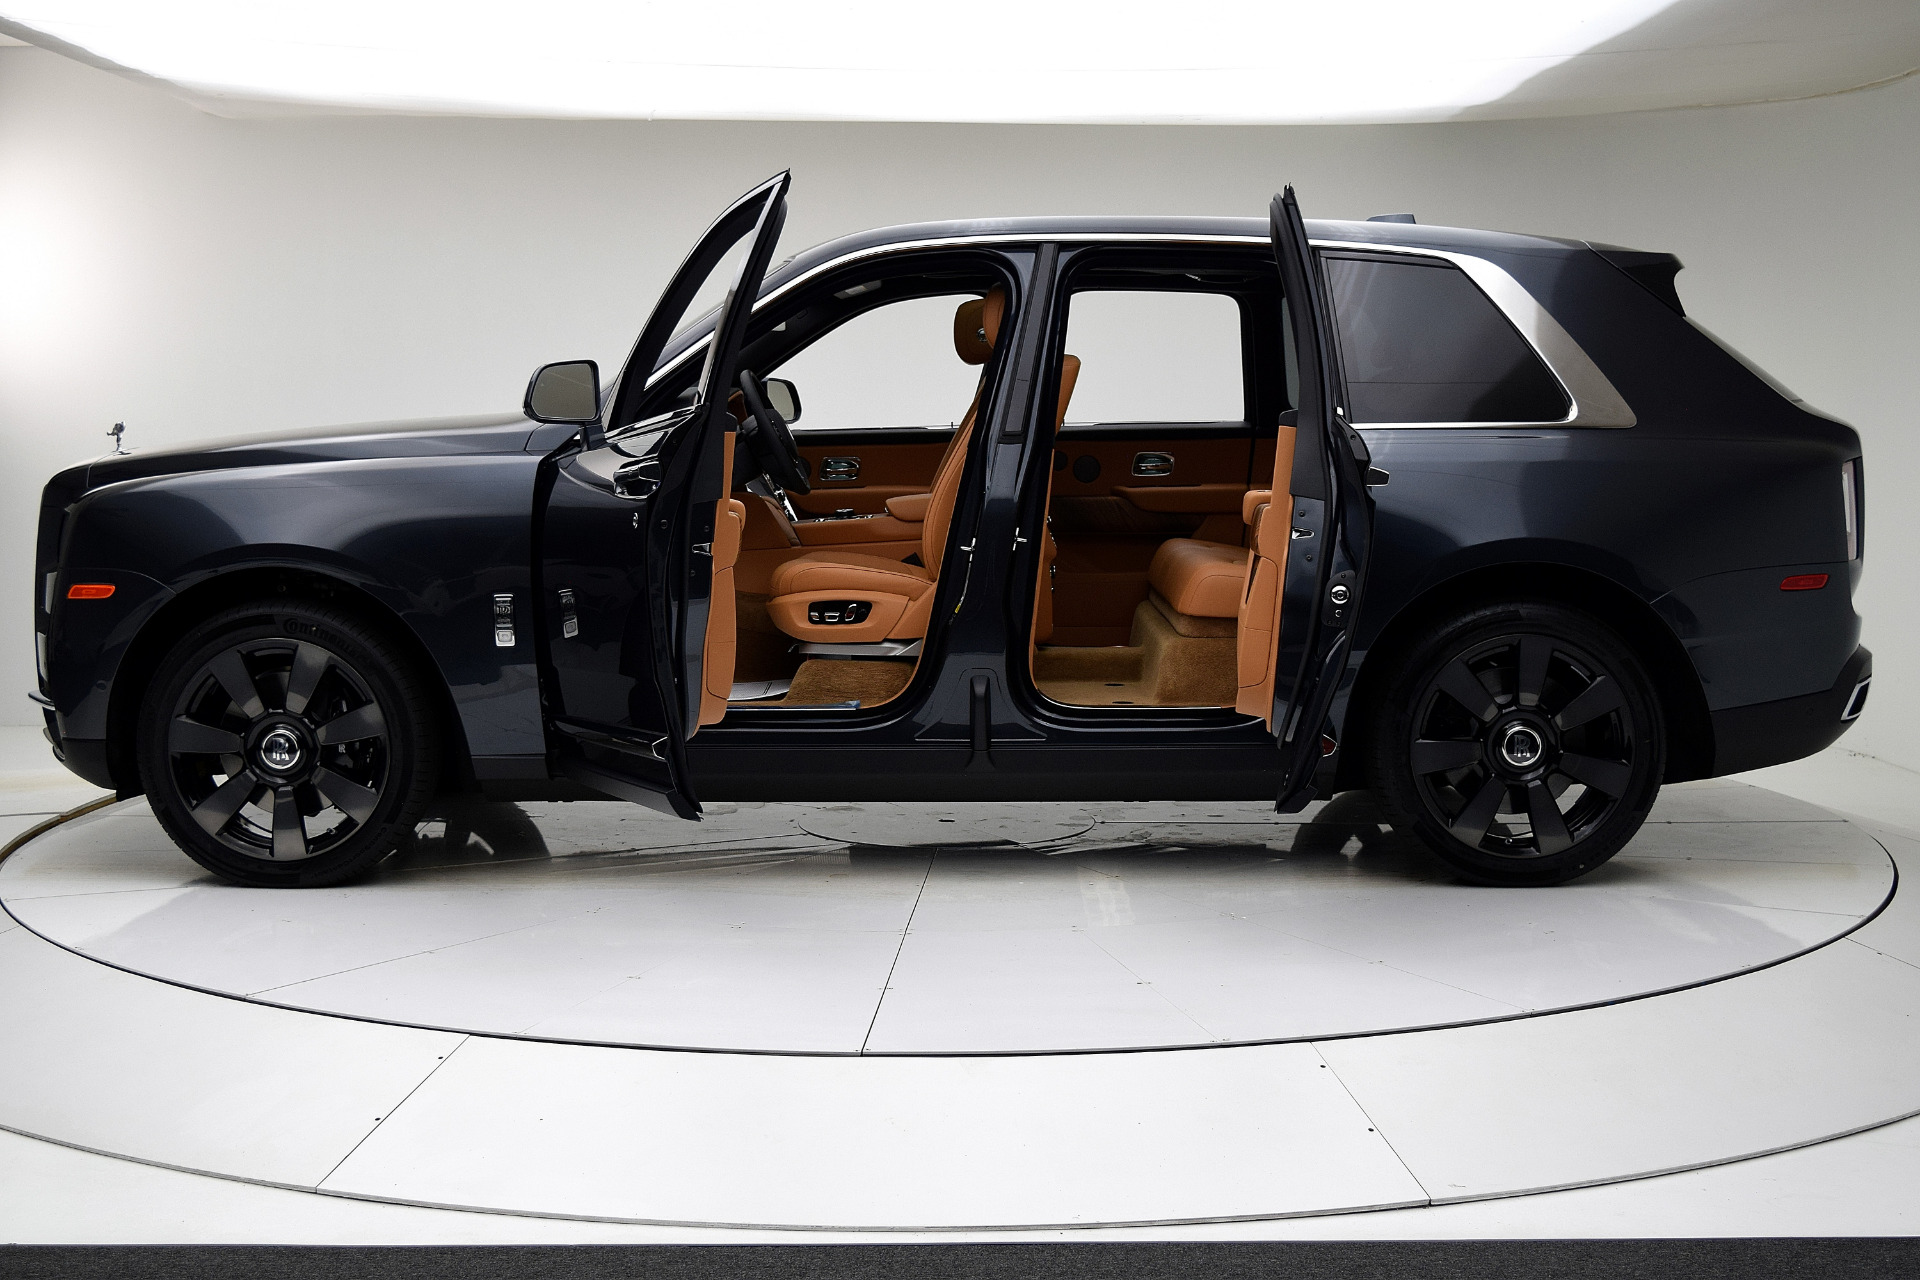 Rolls Royce Cullinan The Crown Jewel of SUVs  A Girls Guide to Cars